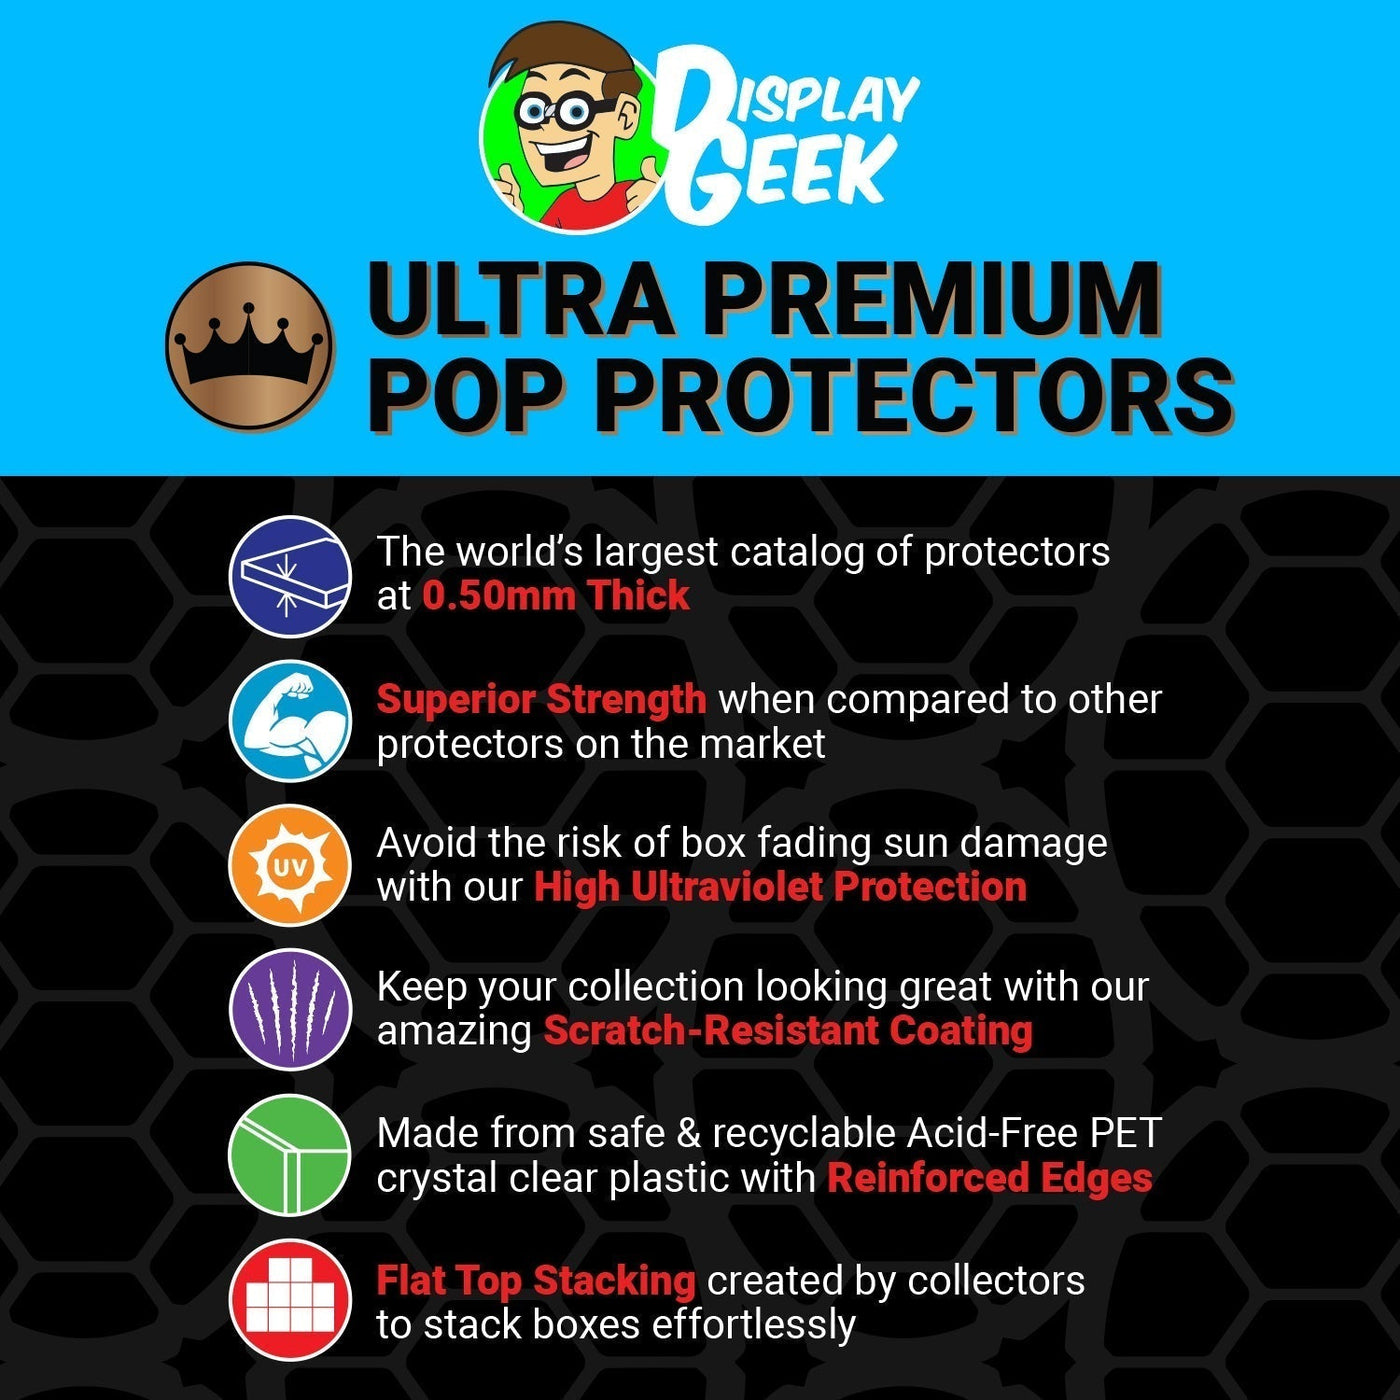 Pop Protector for Tom Brady Tampa Bay Buccaneers #11 Funko Trading Cards on The Protector Guide App by Display Geek